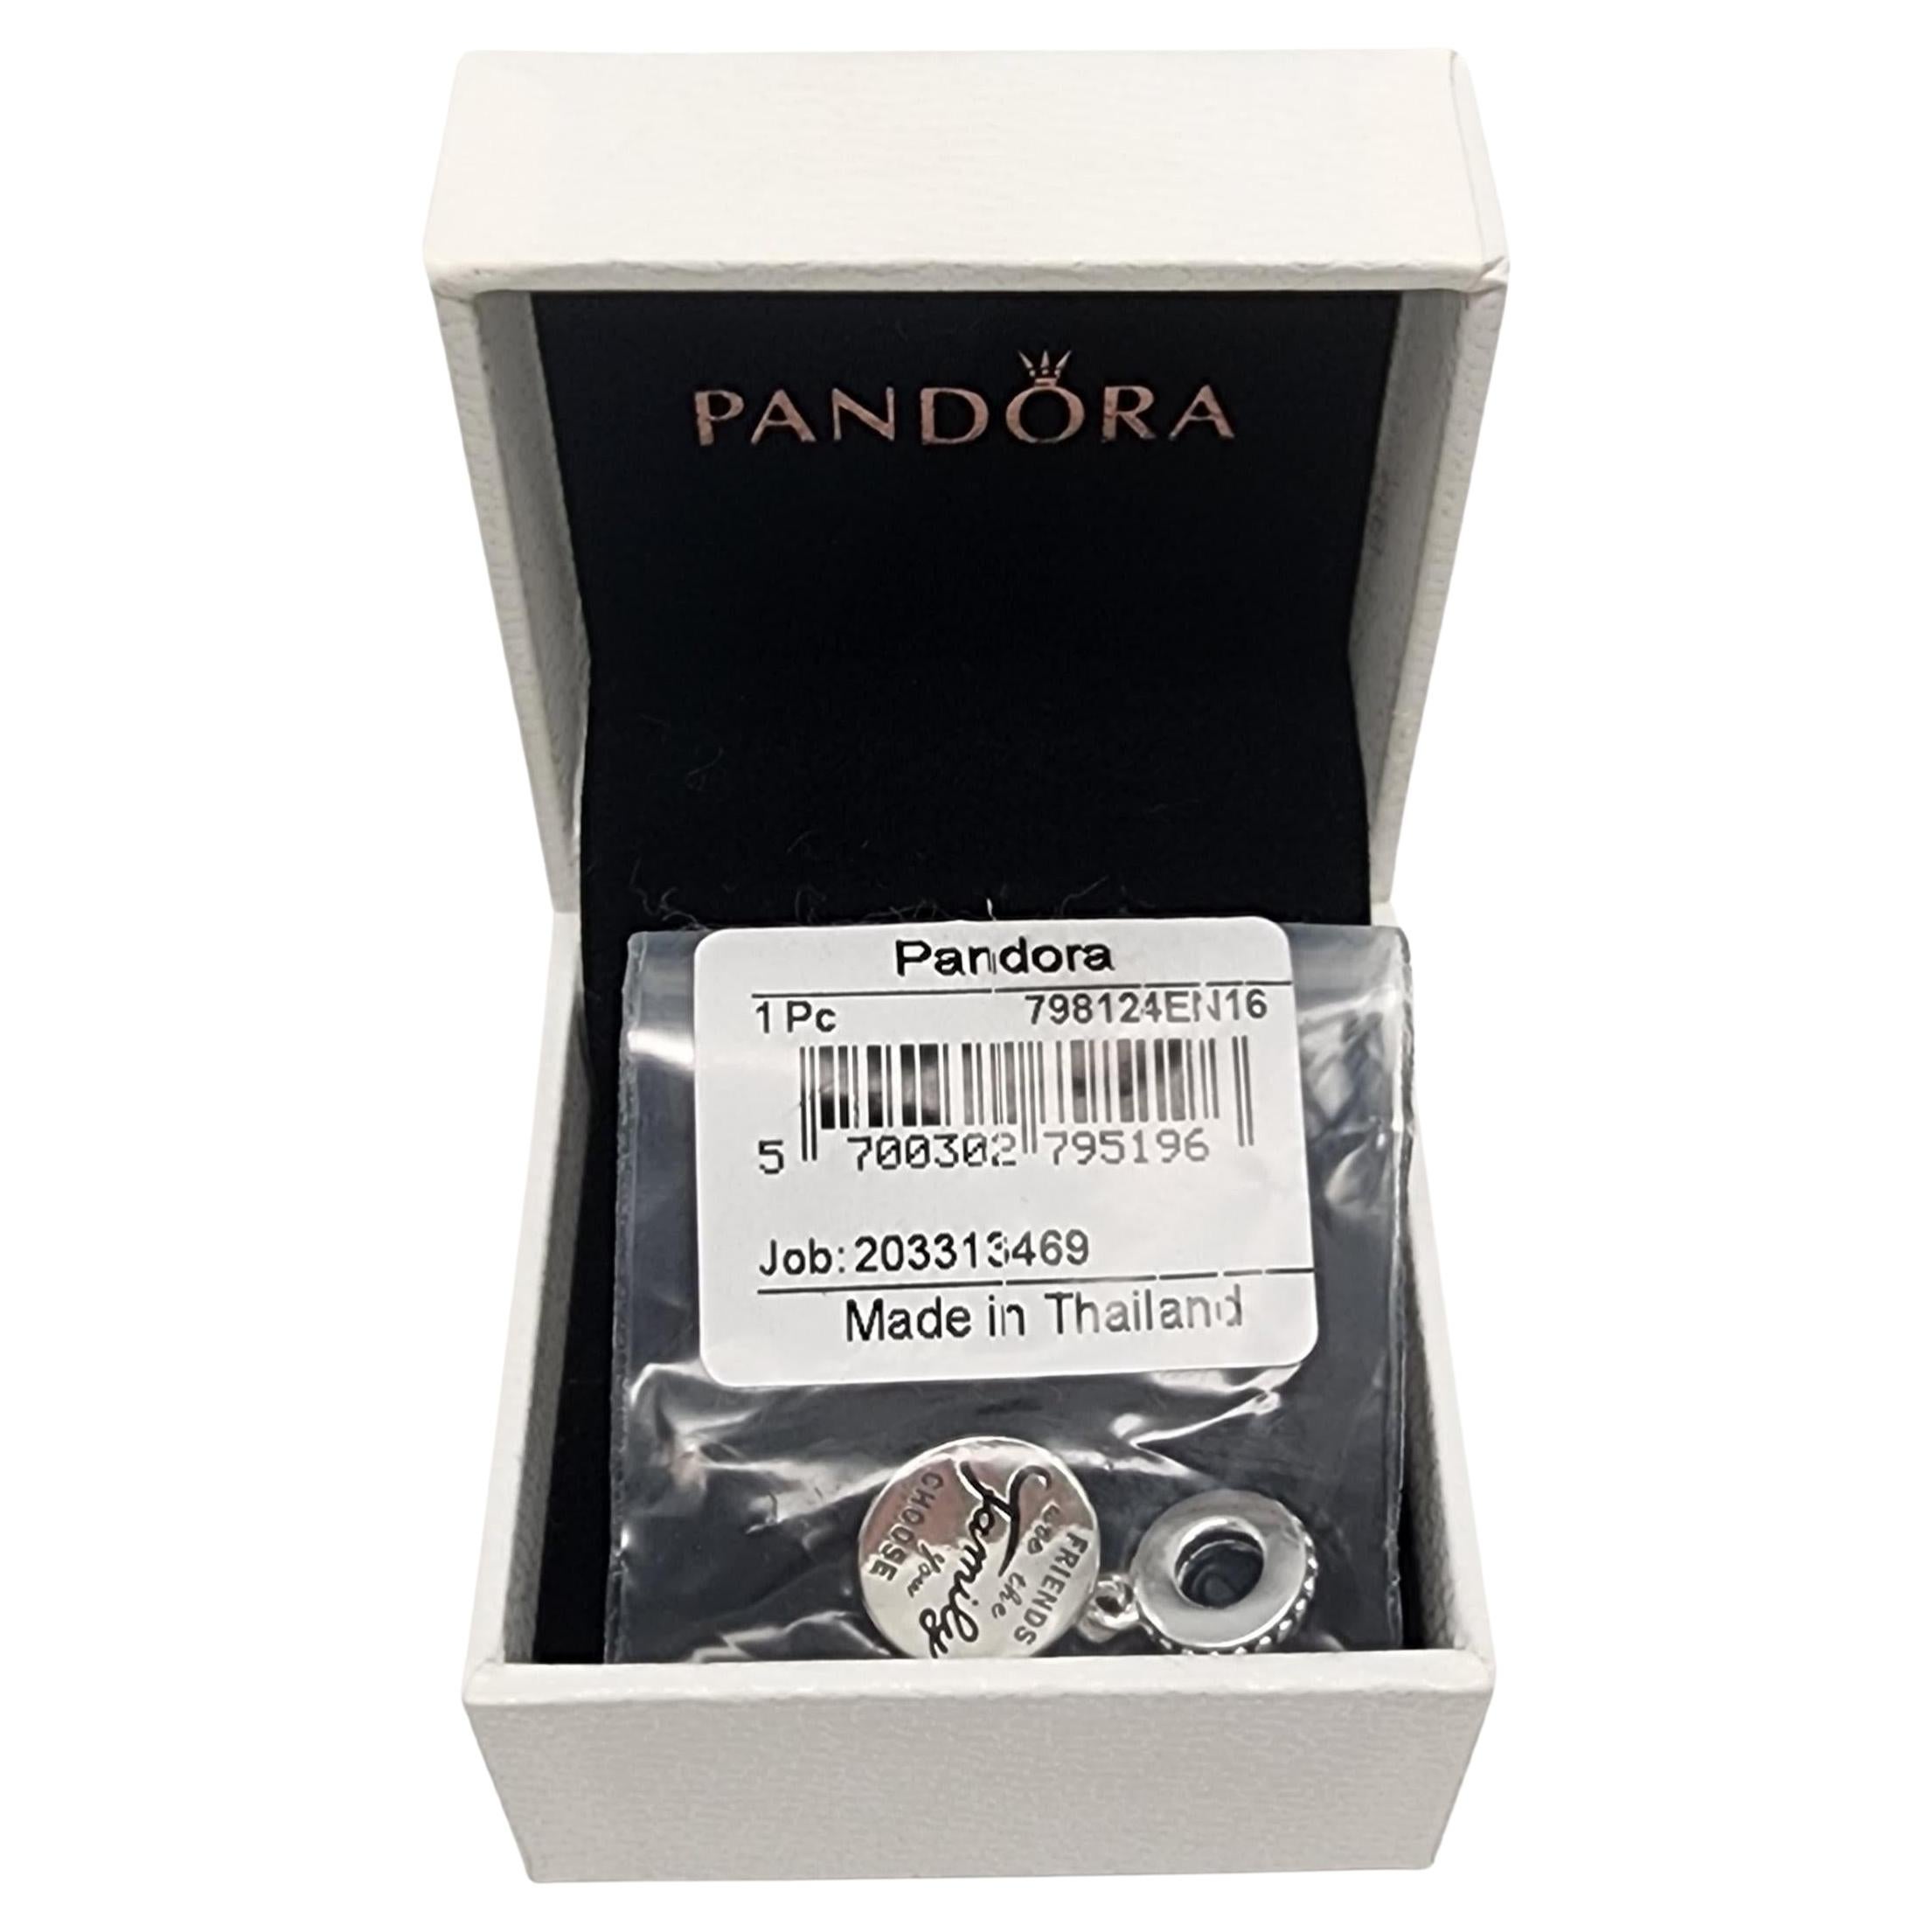 Authentic Pandora Sterling Silver Friends Are Family Dangle Charm w/Box #15328 For Sale